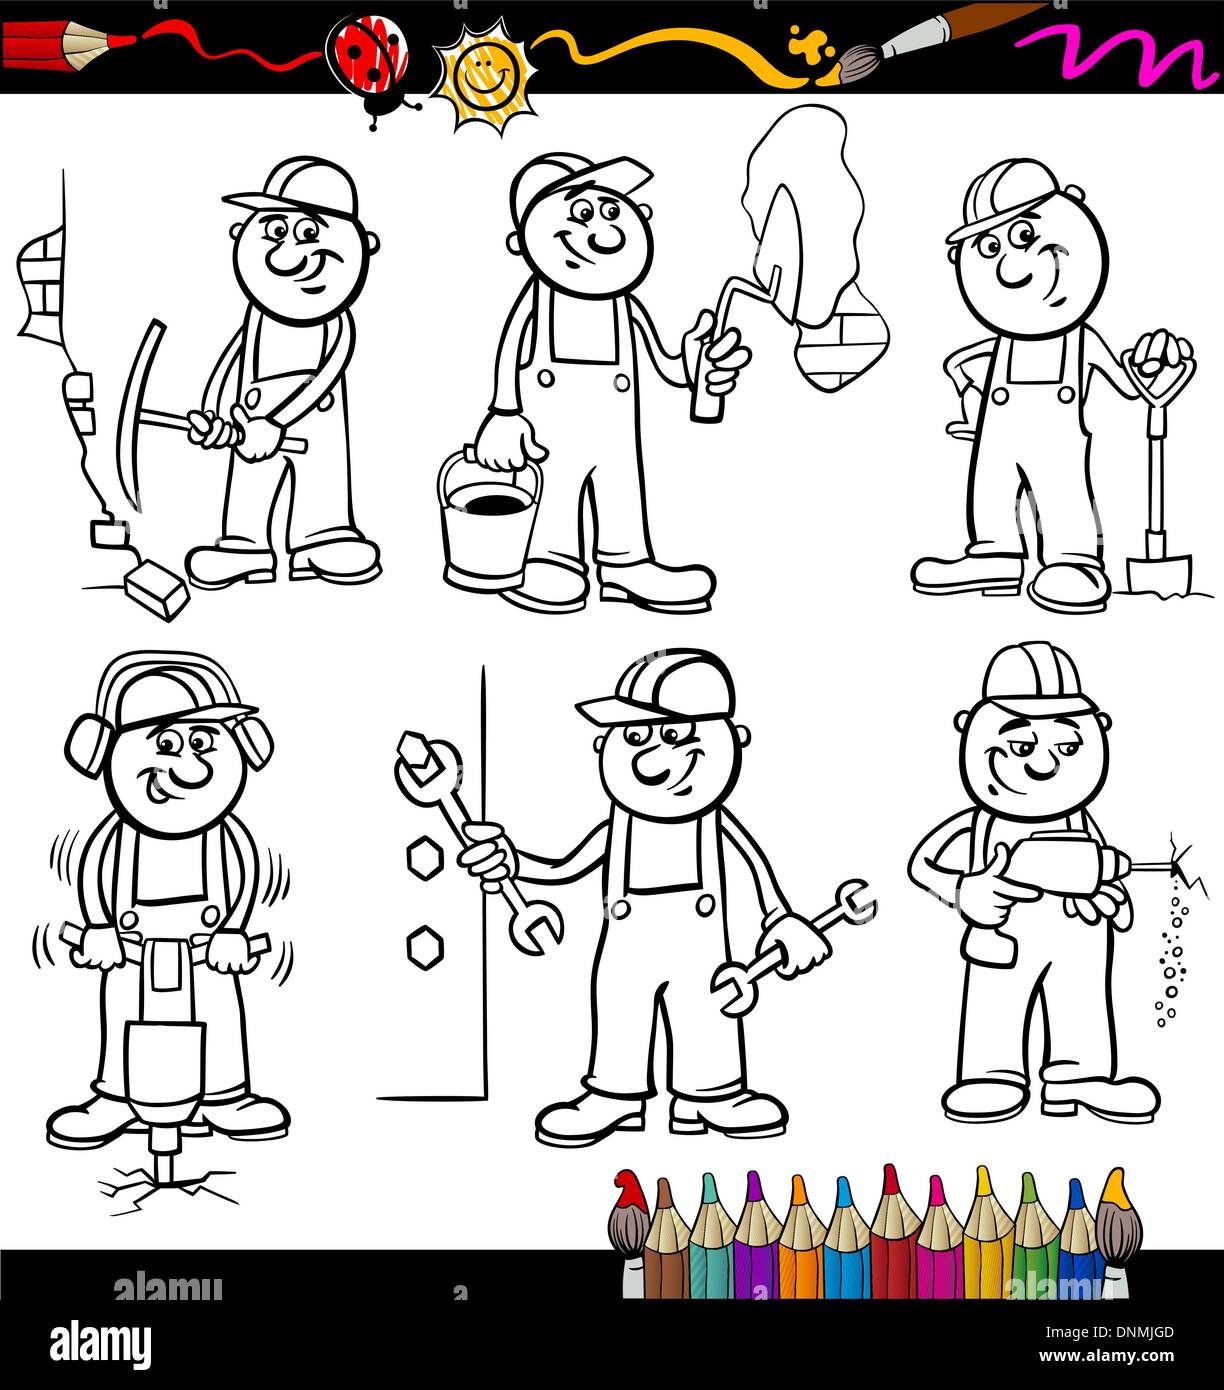 Coloring Book or Page Cartoon Illustration of Black and White Funny Manual Workers or Workmen at Work Characters Set for Childre Stock Vector